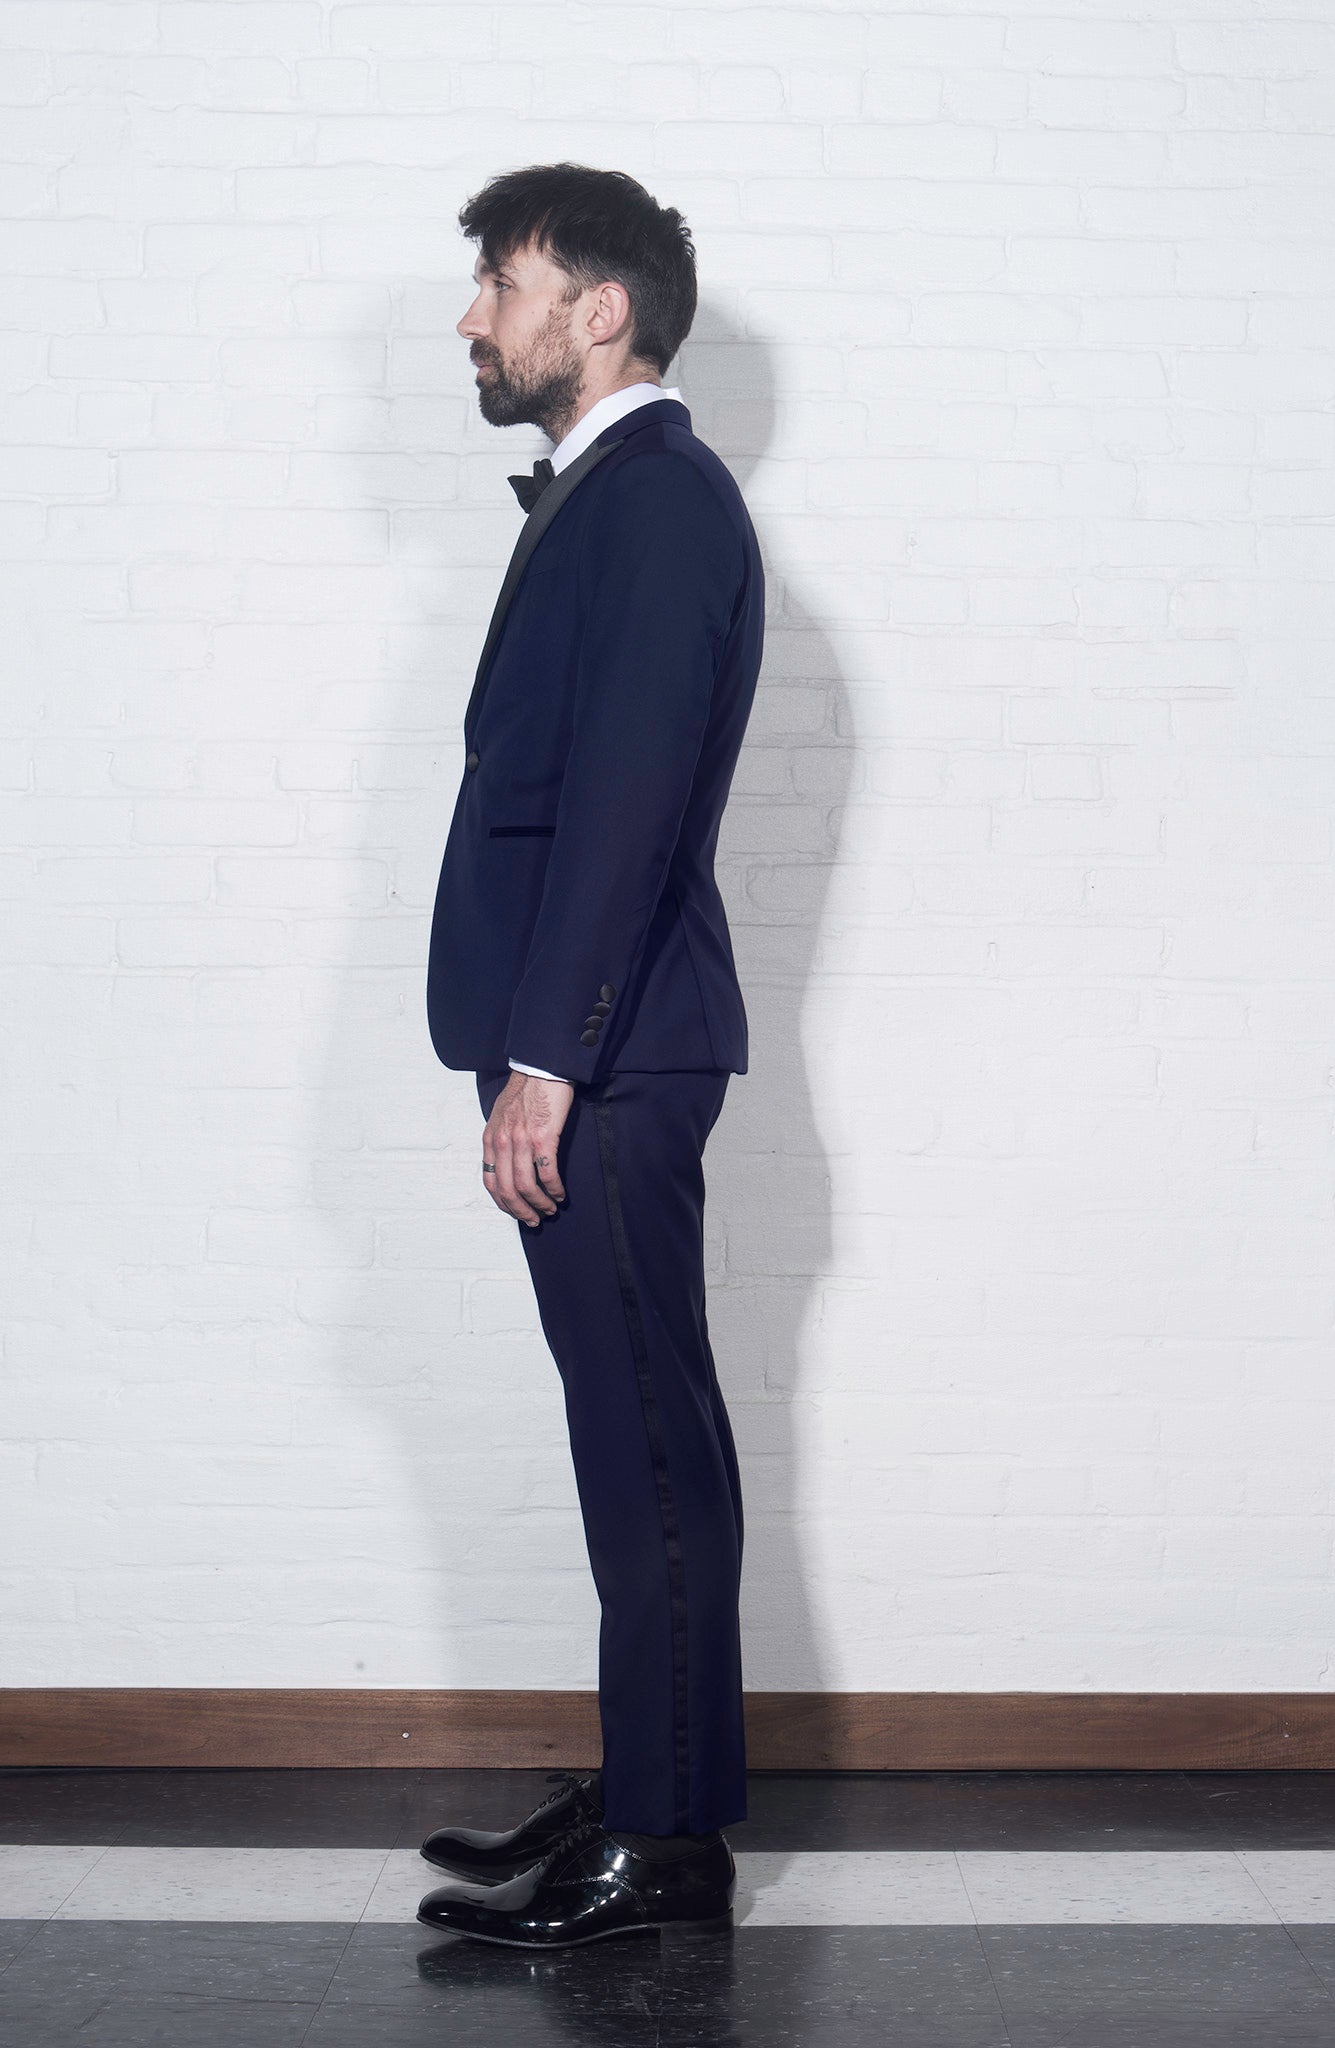 On-body shot of BKT50 Tuxedo Trouser in Super 110s - Navy with Satin Stripe from the side. Model is wearing trouser with matching jacket, white tuxedo shirt, and black bowtie